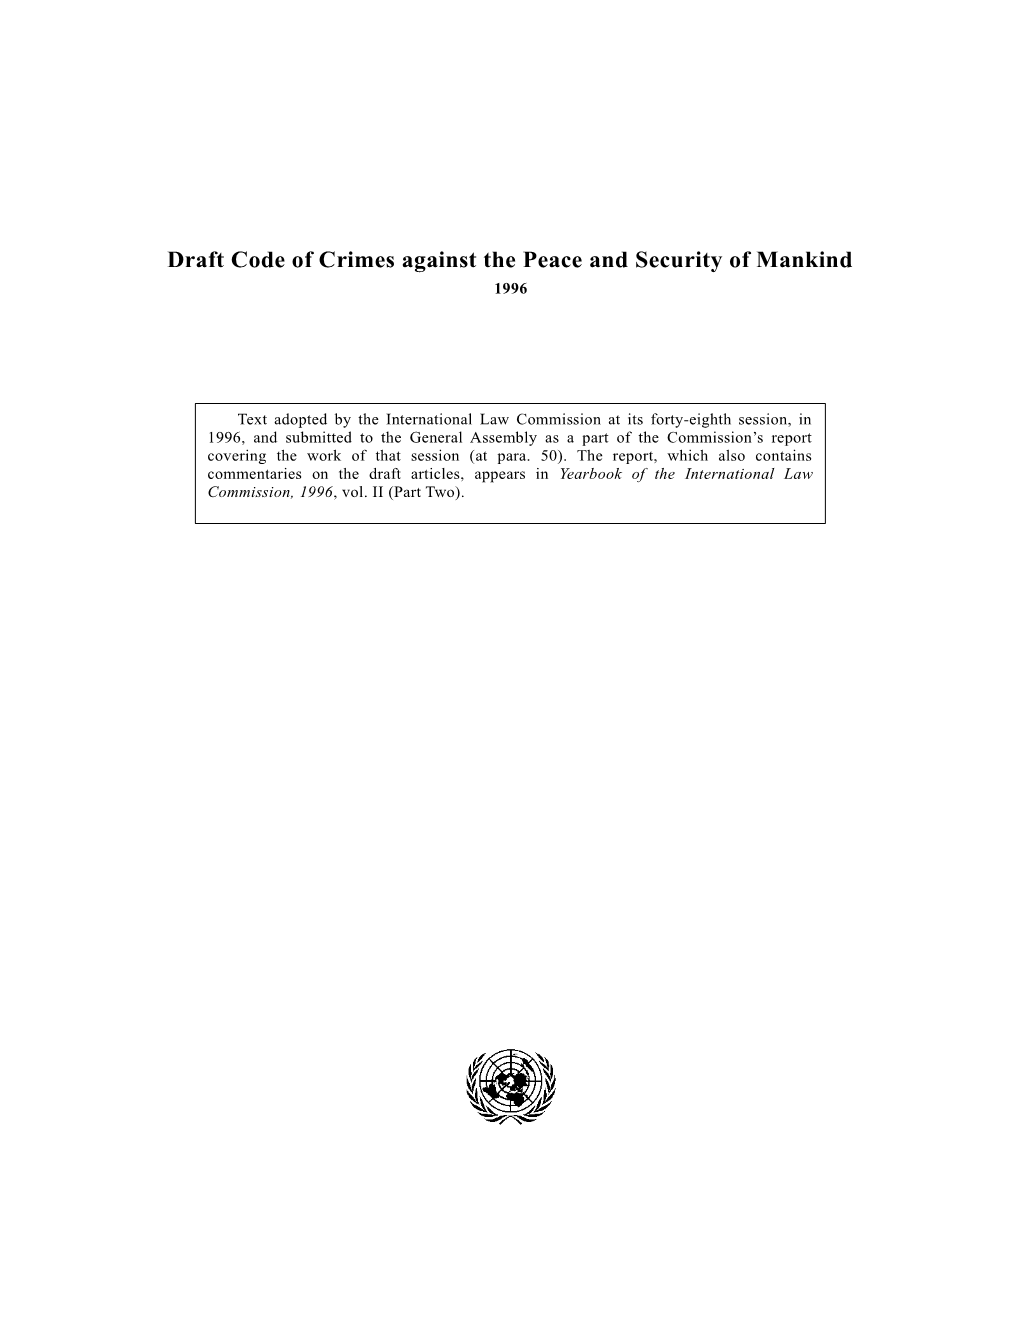 Draft Code of Crimes Against the Peace and Security of Mankind